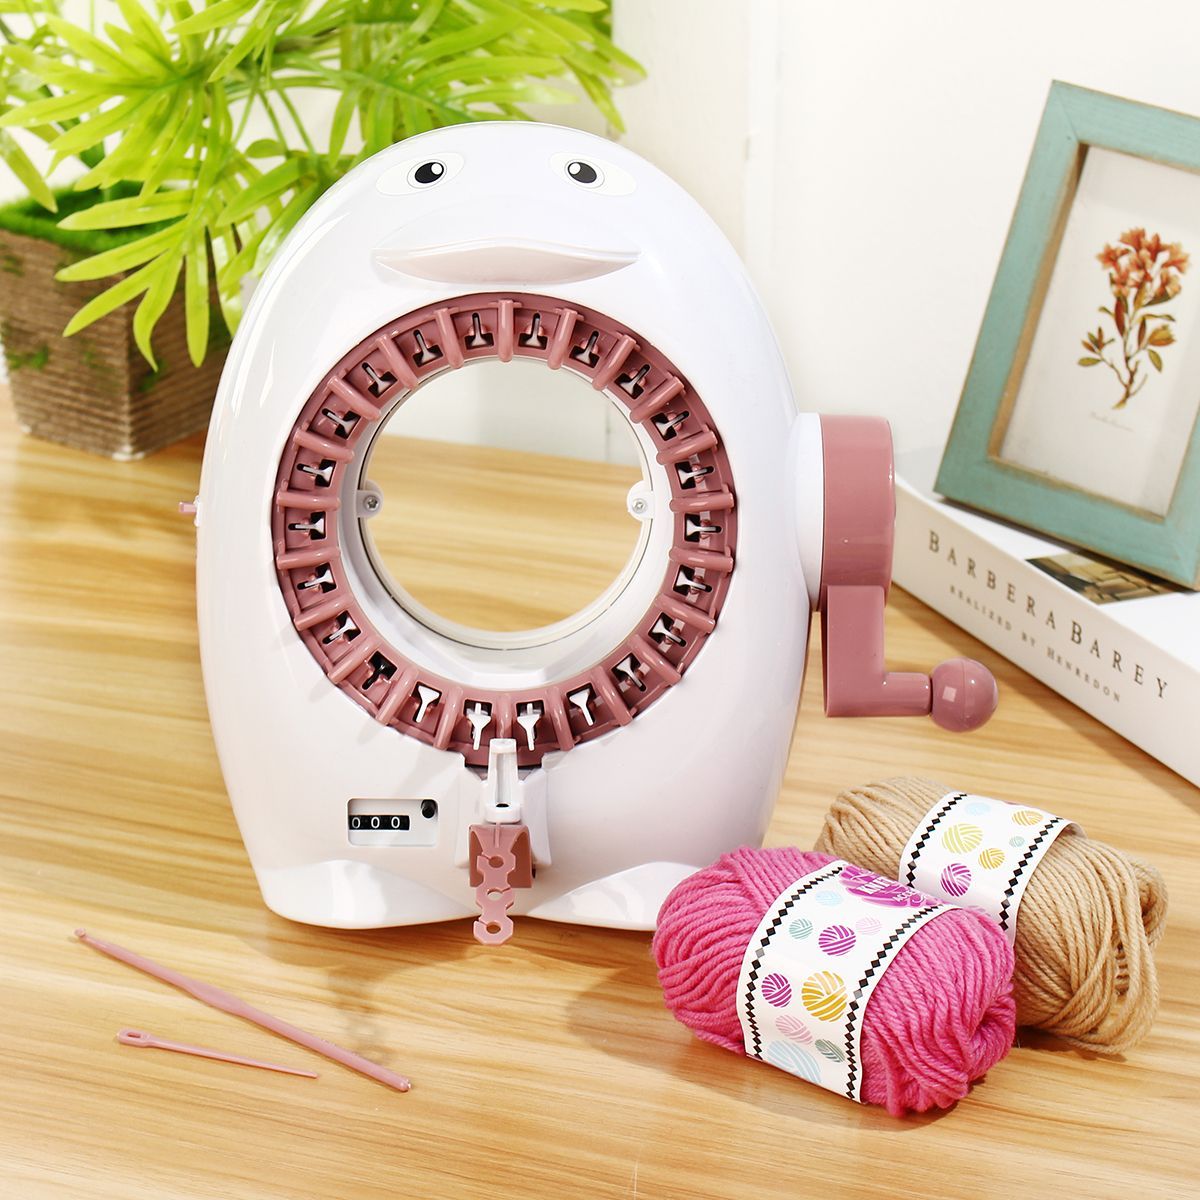 Kids-Loom-Knitting-Machine-Scarf-Hat-Clothes-Knitter-Weaving-Educational-Toys-1498020